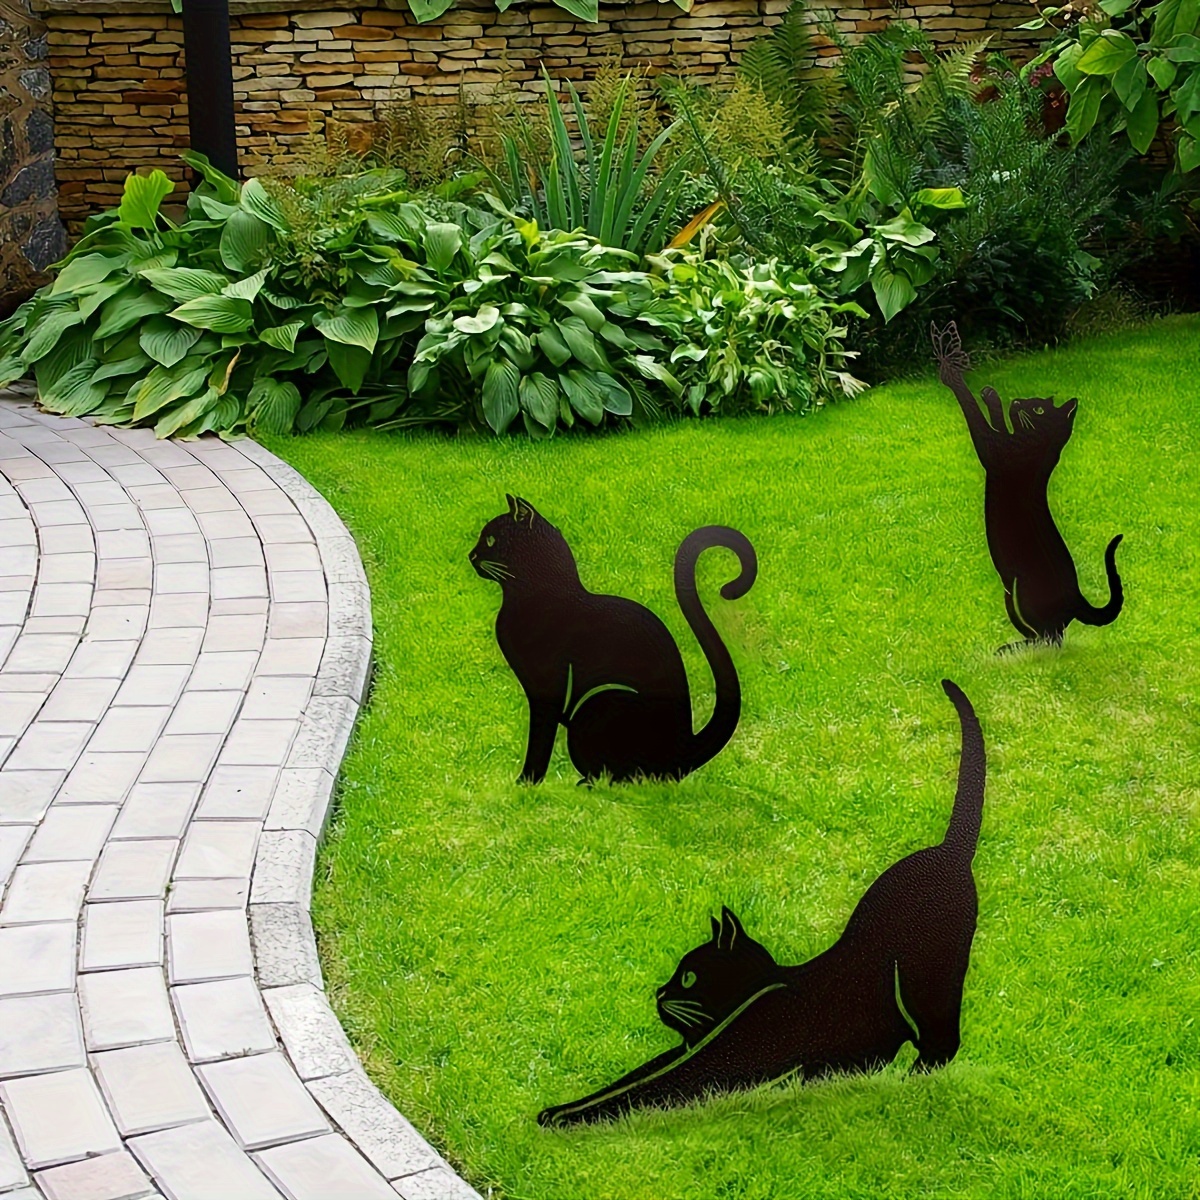 

1pc Cat Silhouette Garden Sign With Stakes, Metal Ground Insert Garden Decor, Outdoor Home Decor, Insert Decoration For Home Garden Patio, Fence Yard Lawn Art Decor, Spring Decoration